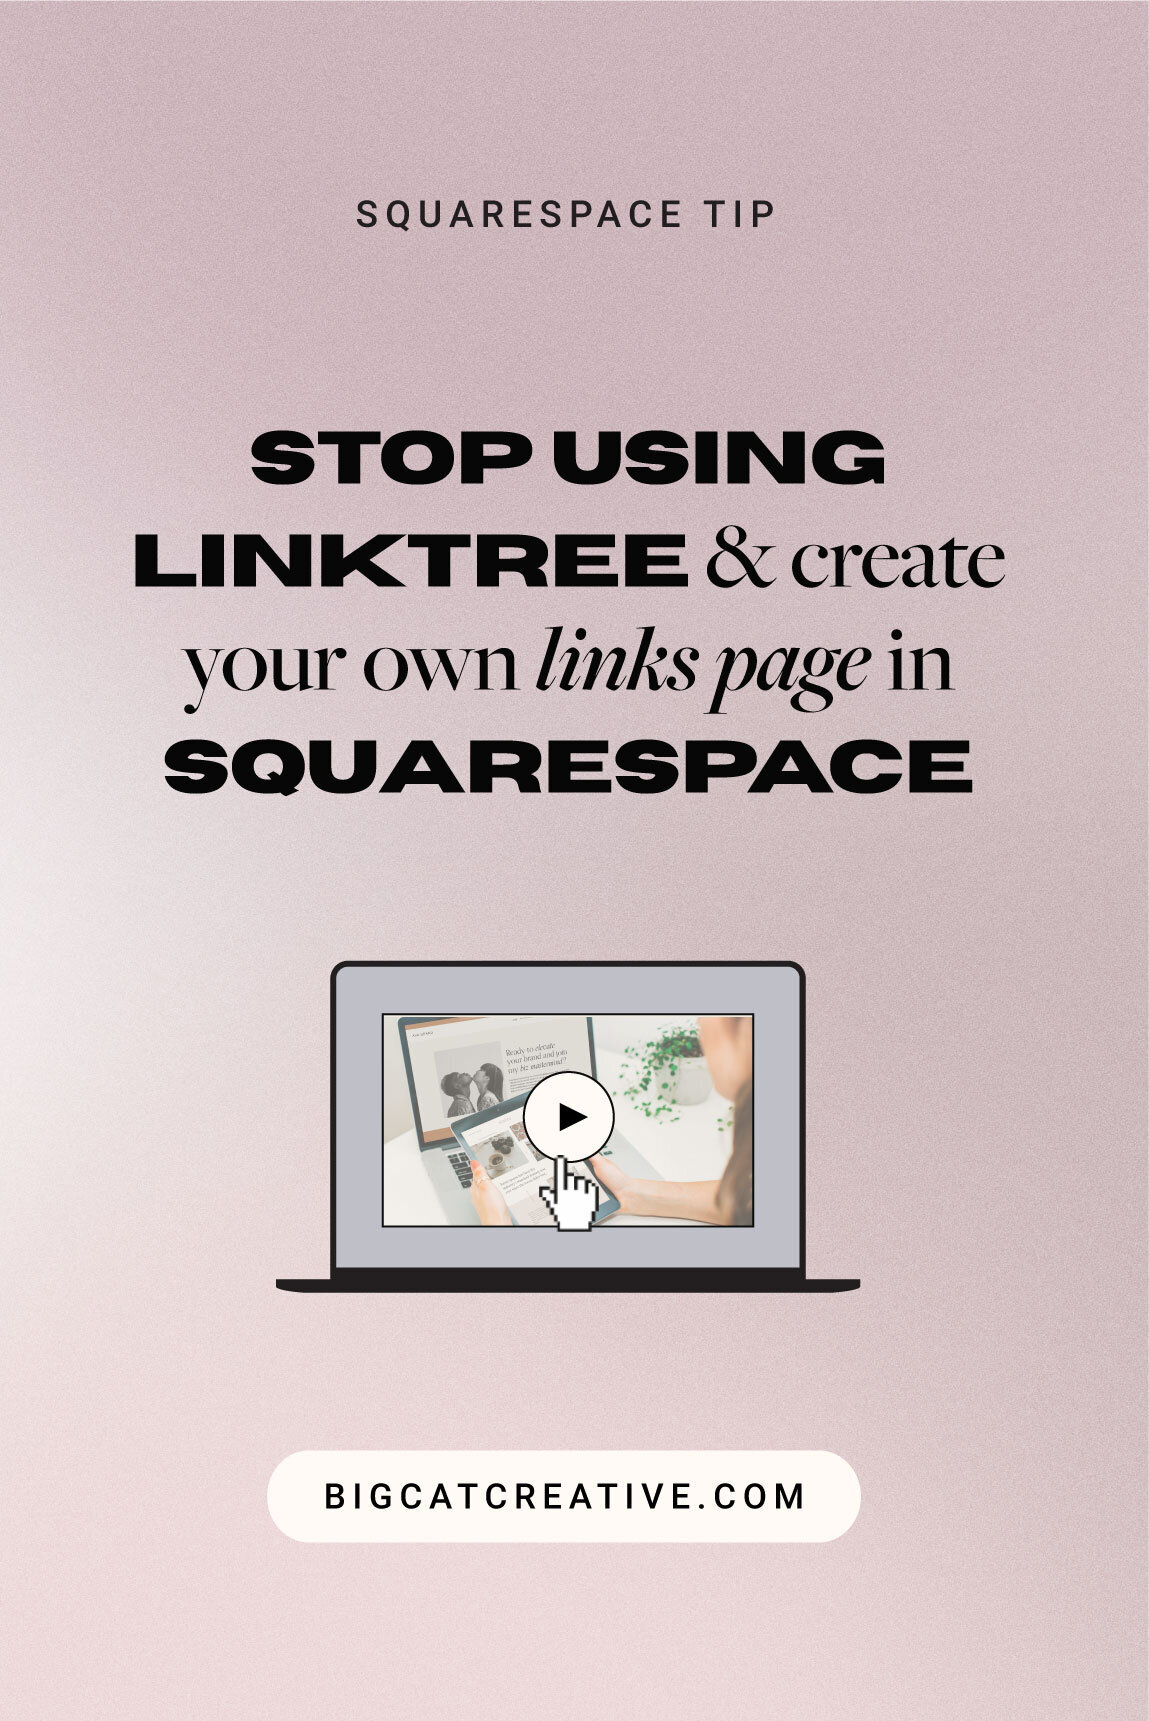 3 Reasons Why You Should Stop Using Linktree Today